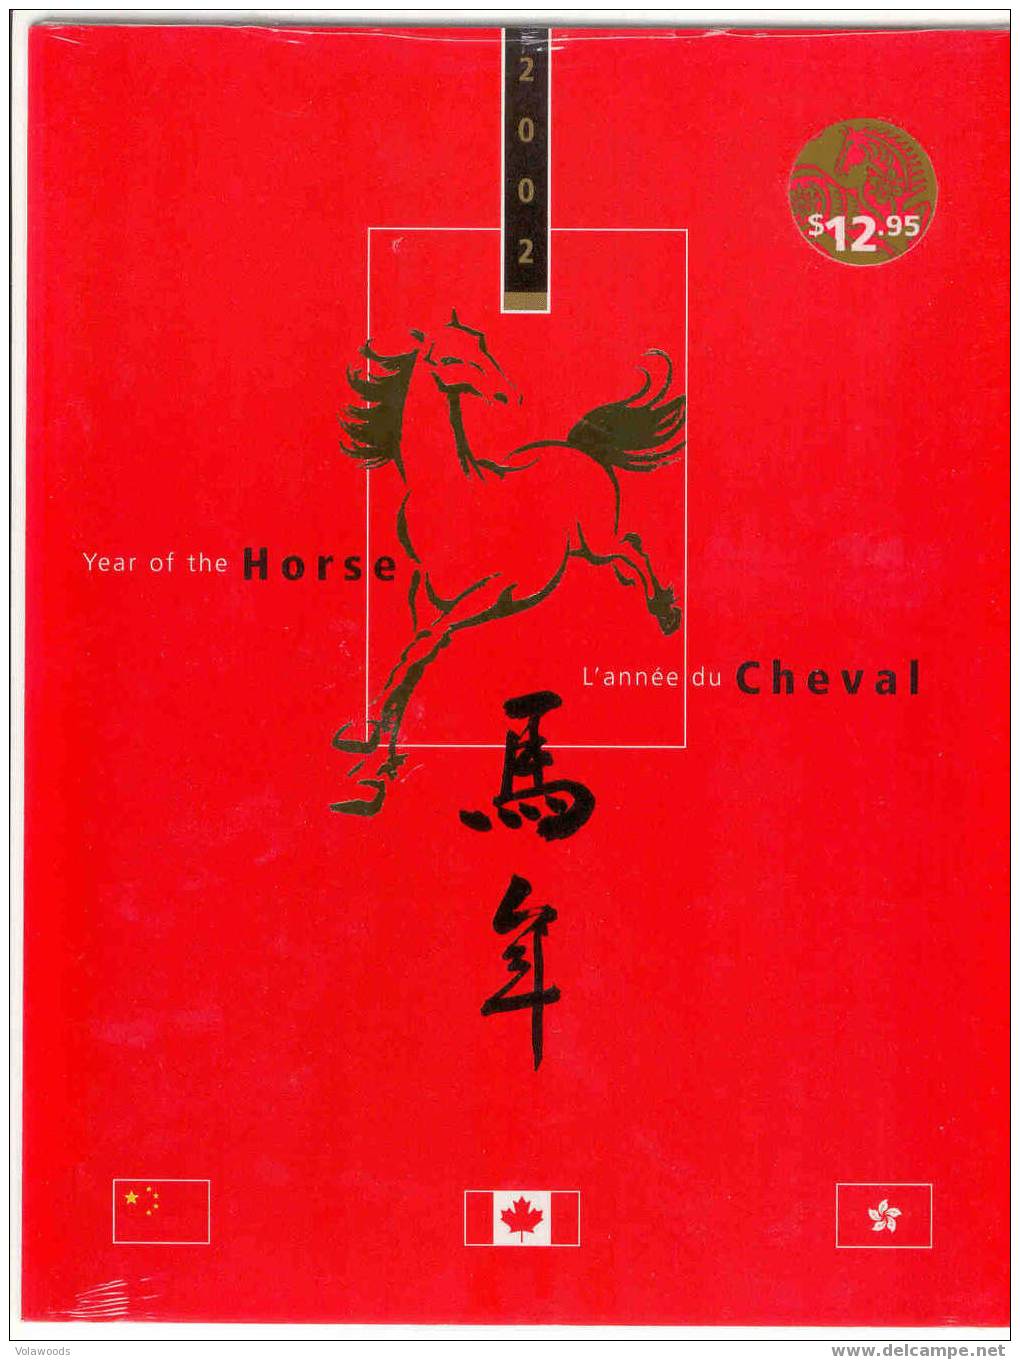 New Year 2002 - Year Of The Horse - Joint Issue Canada China Hong Kong - - Chinese New Year